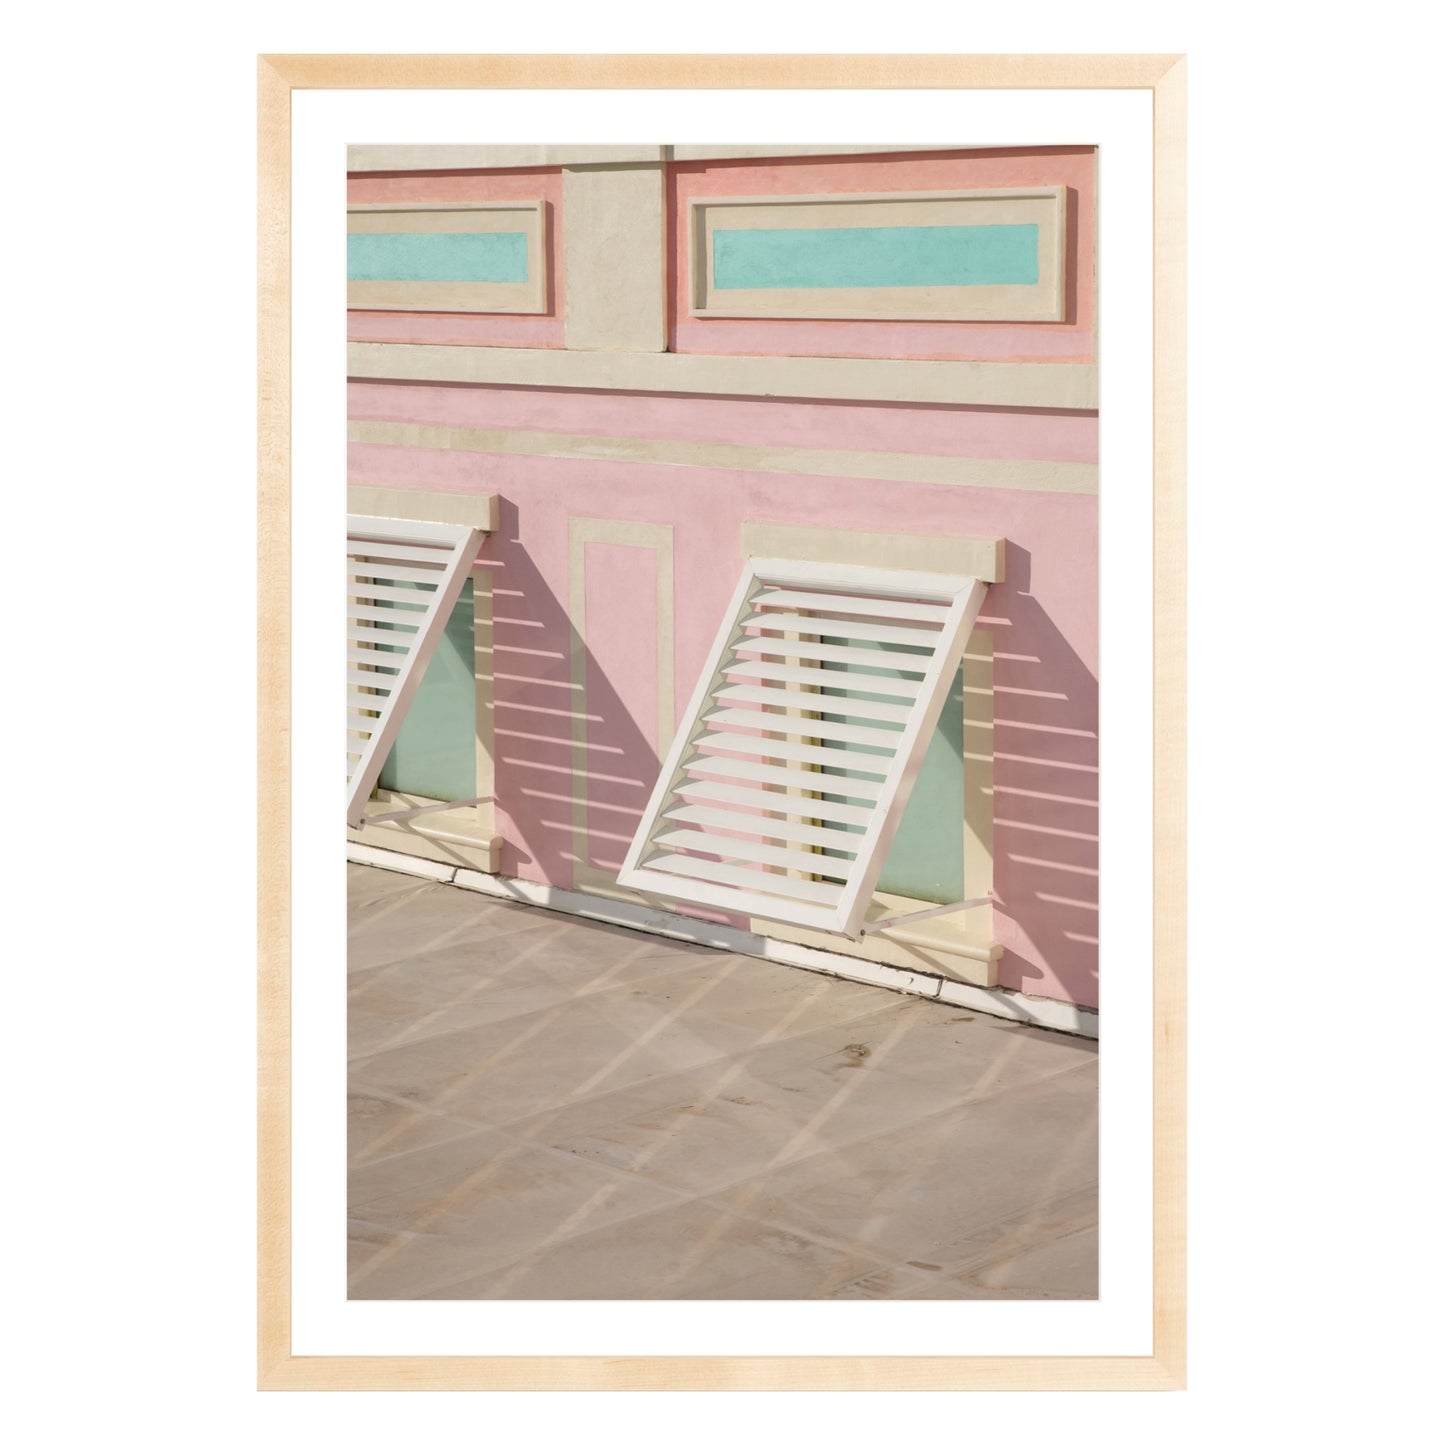 Photograph of colorful geometric building with open window shades in Baha Mar, Bahamas framed in natural wood with white mat